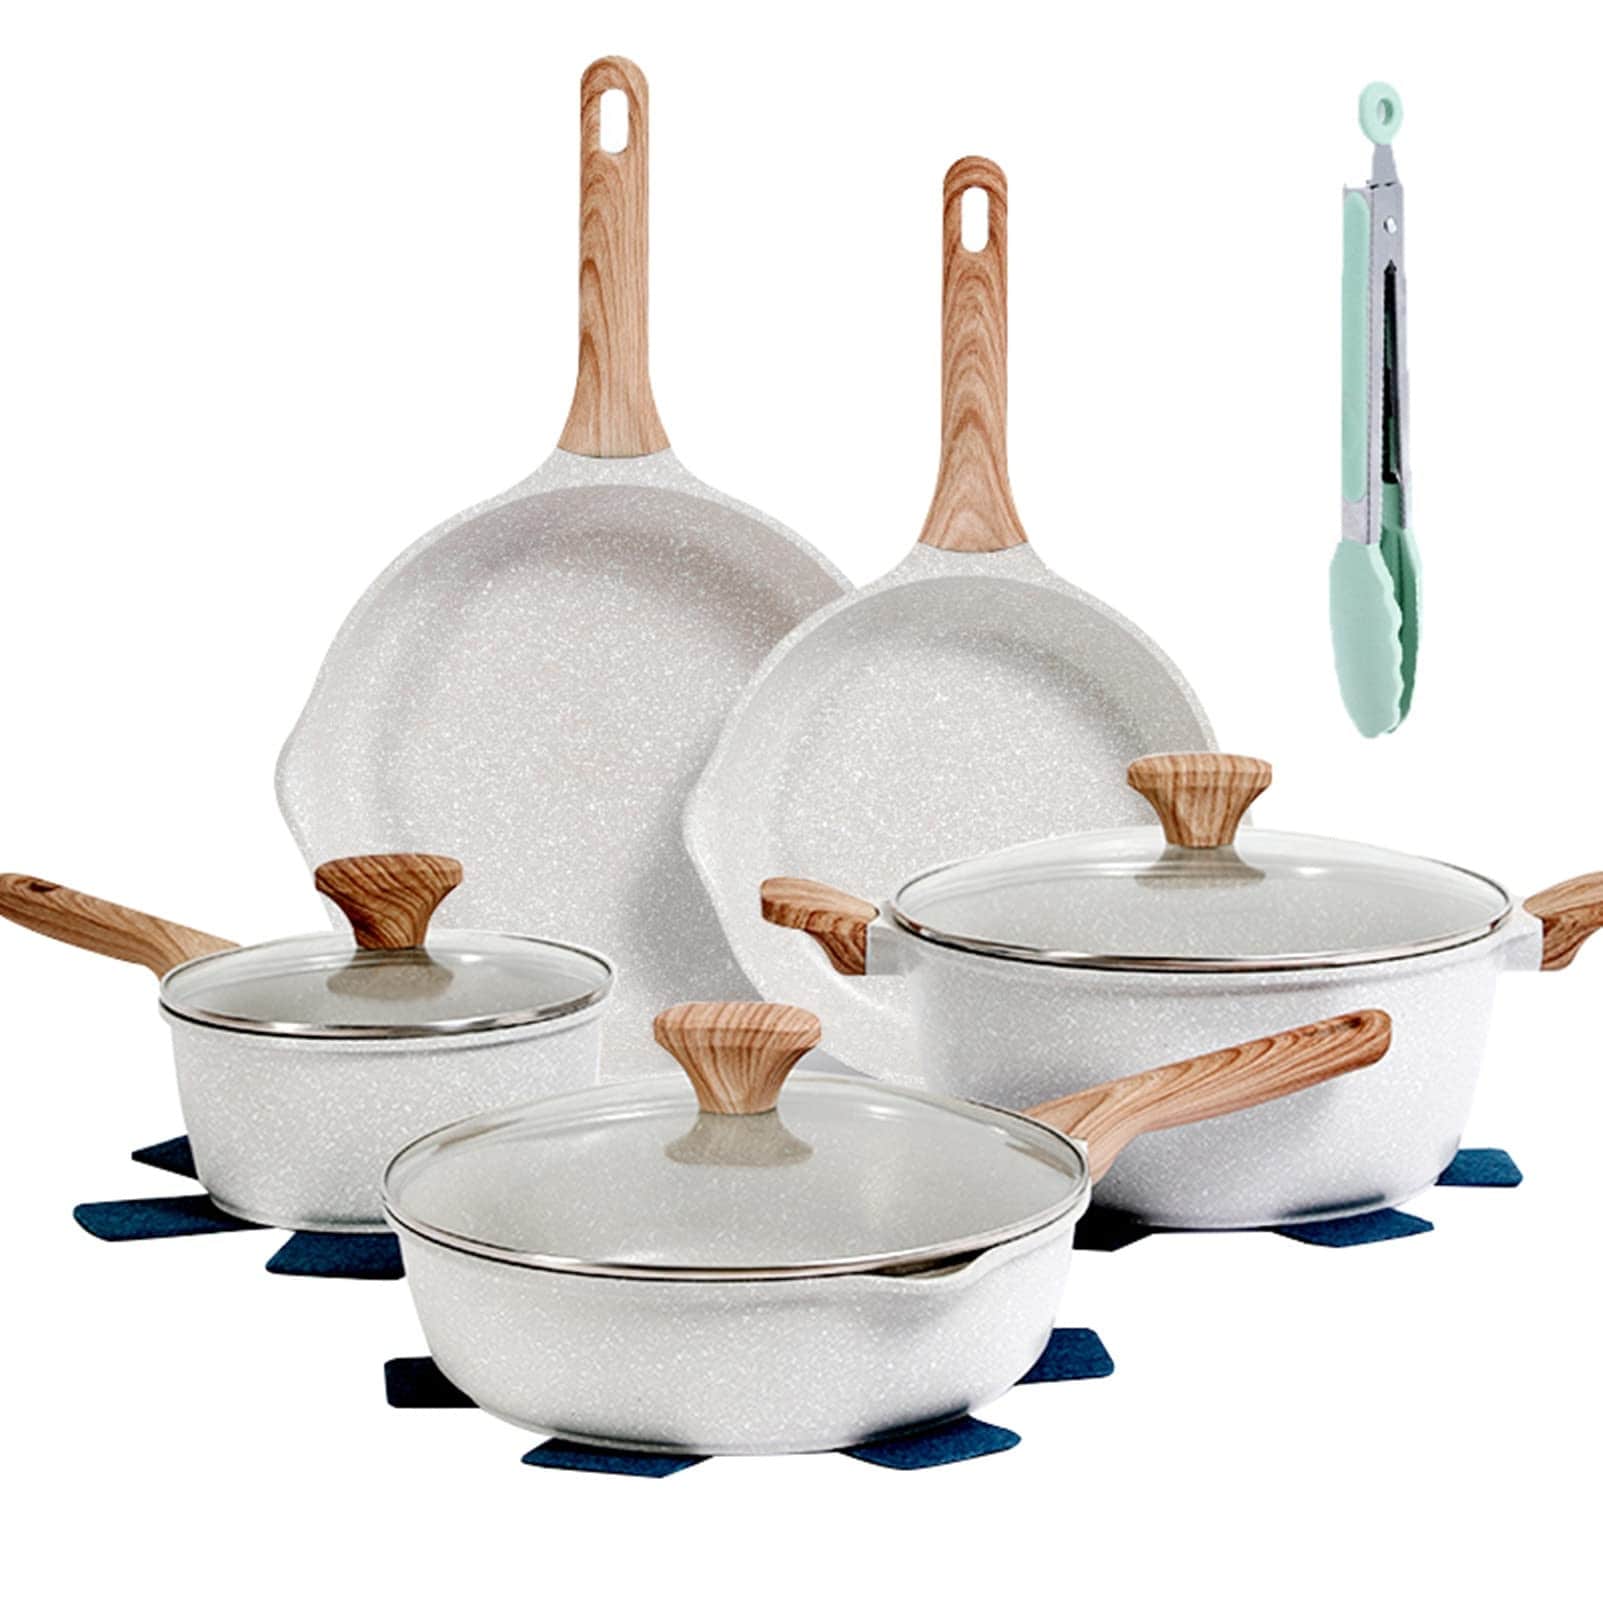 https://ak1.ostkcdn.com/images/products/is/images/direct/8c939f695ad87940c3194089656c0bd45d9bd5b3/Nonstick-Cookware-Sets%2C-12-Piece-Kitchenware-Pots-and-Pans-Set-Granite-Coating%2C-Frying-And-Deep-Frying-pans%2C-Stockpots.jpg